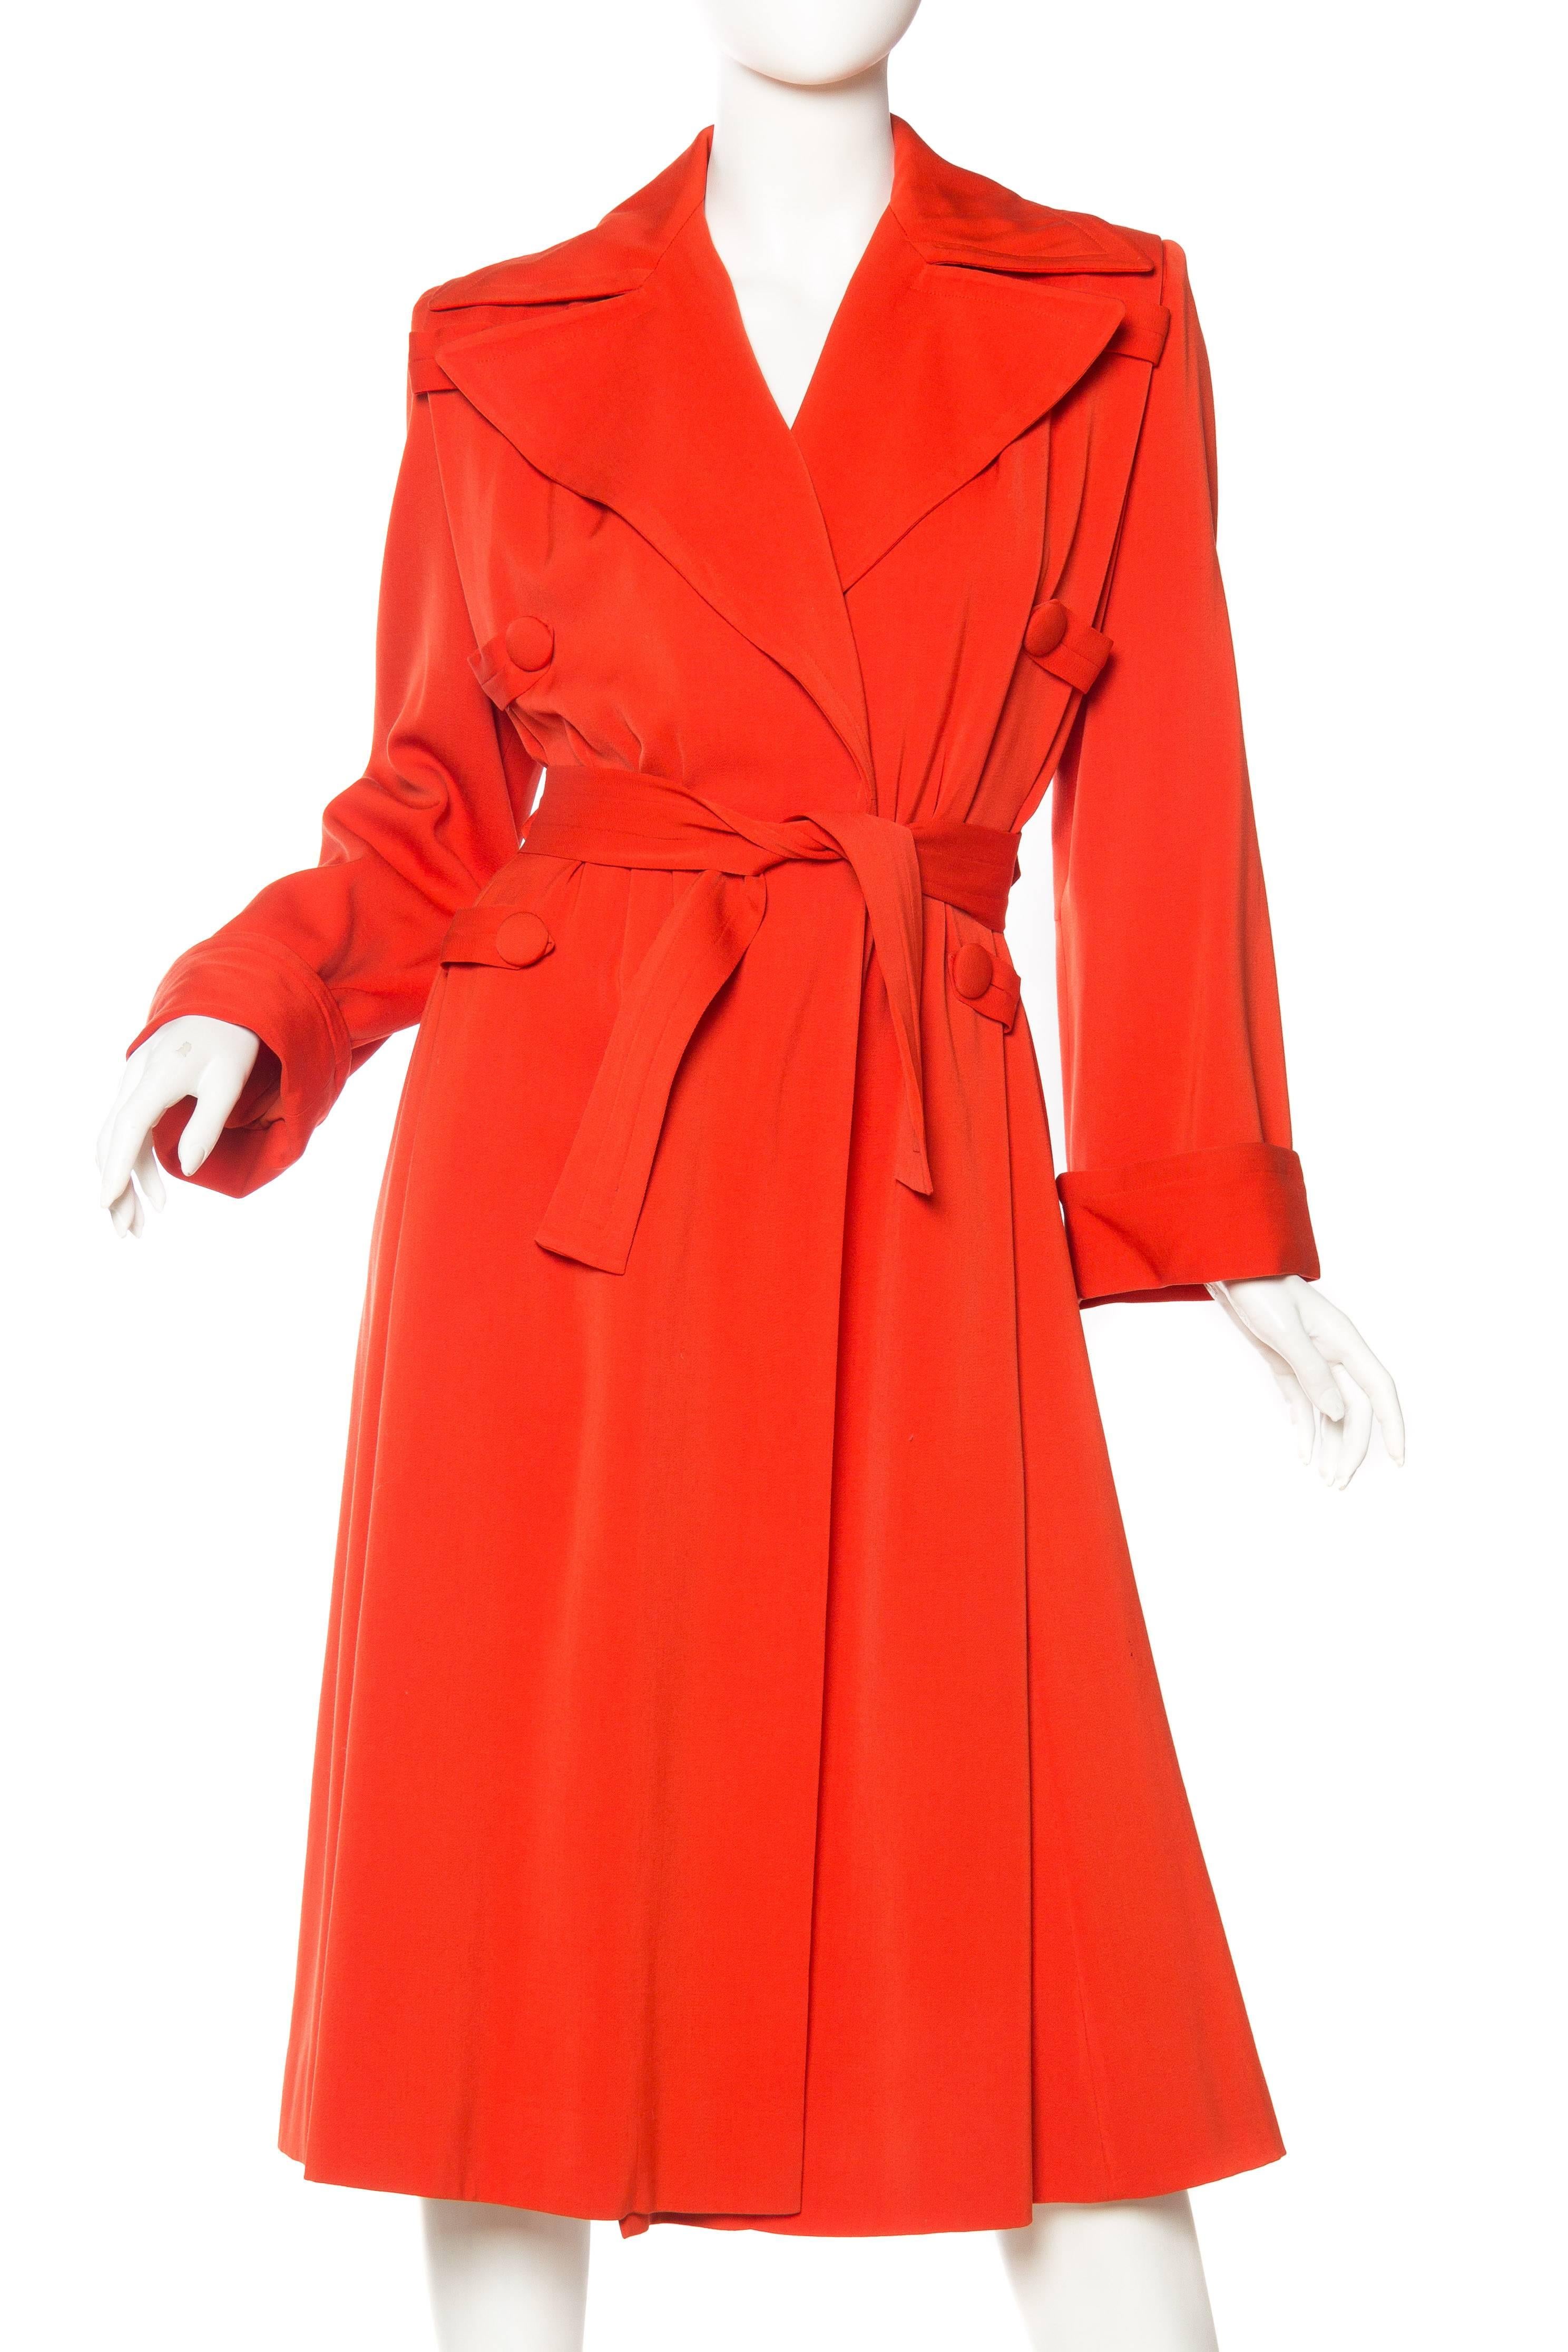 1970s Rich Orange Wool  & Rayon Gaberdine Coat in the Style of the 1940s